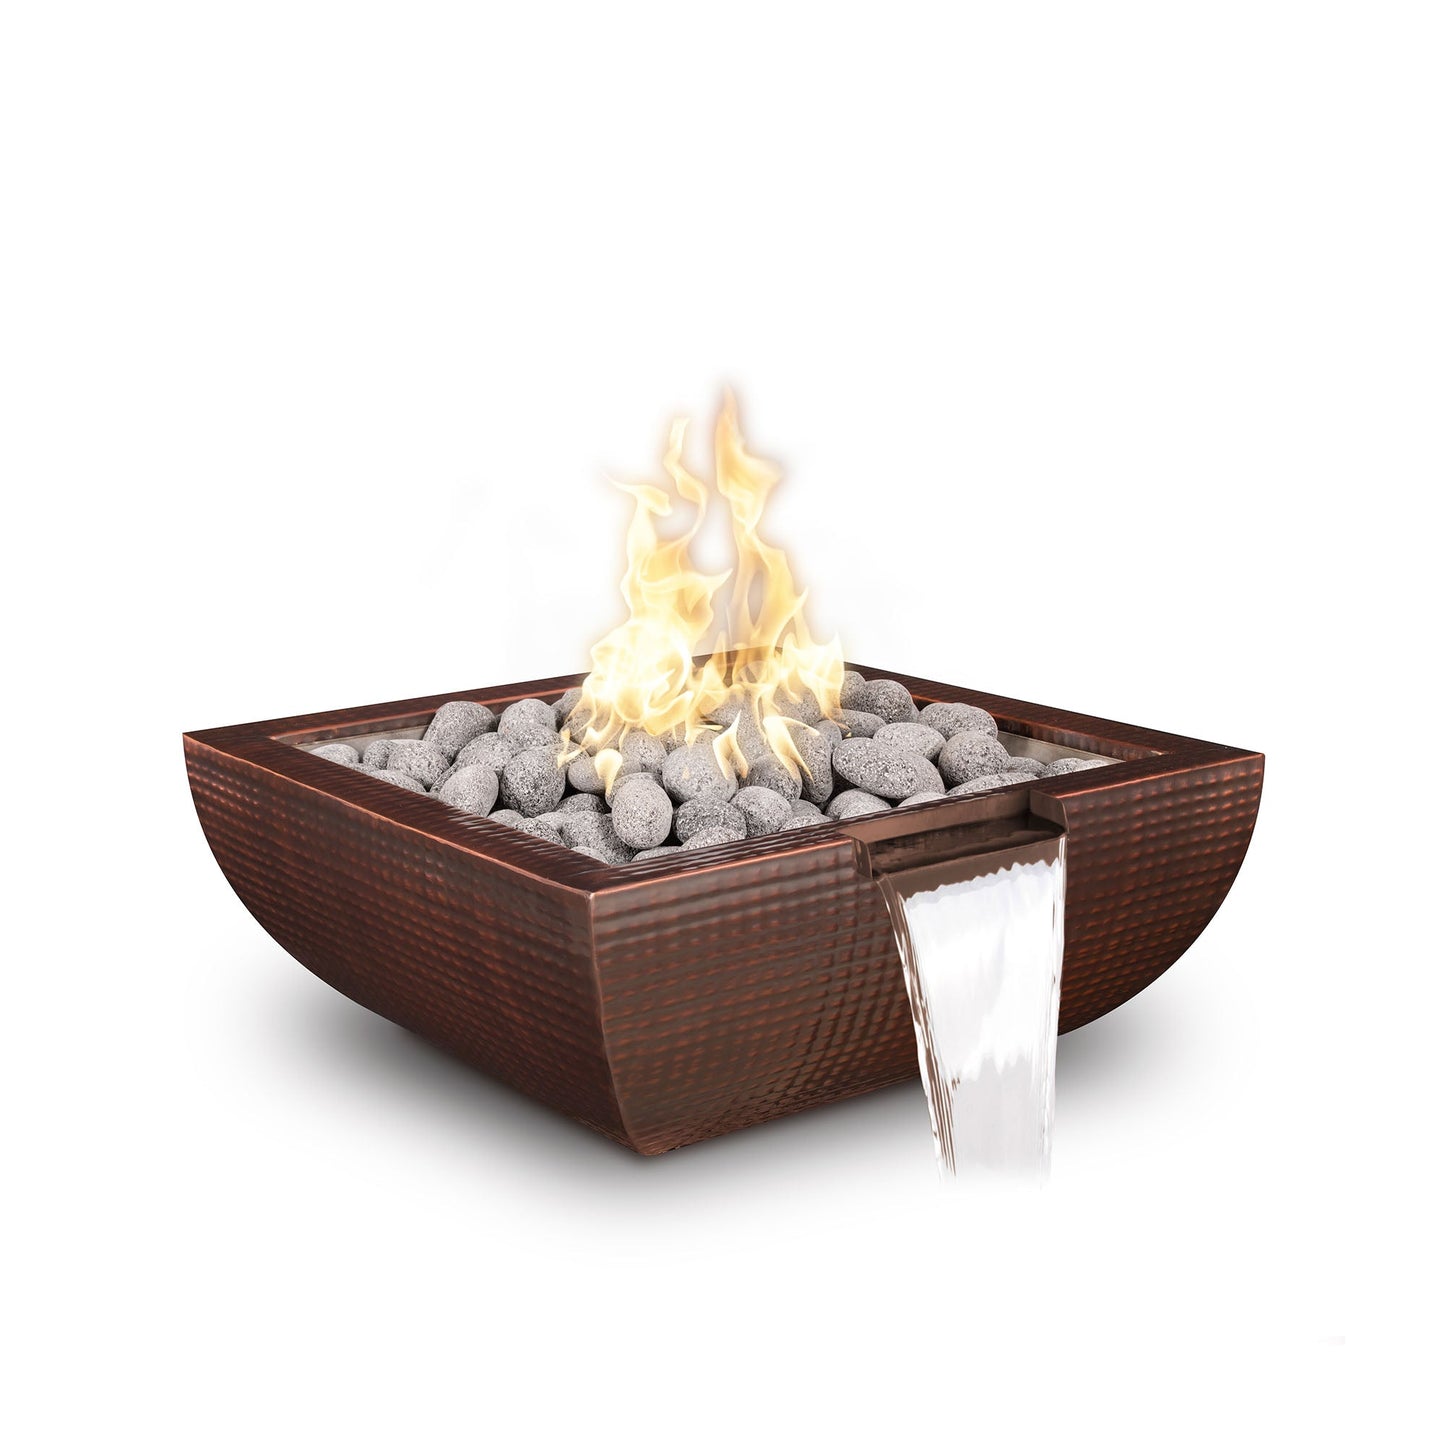 The Outdoor Plus Square Avalon 30" Stainless Steel Liquid Propane Fire & Water Bowl with Match Lit with Flame Sense Ignition